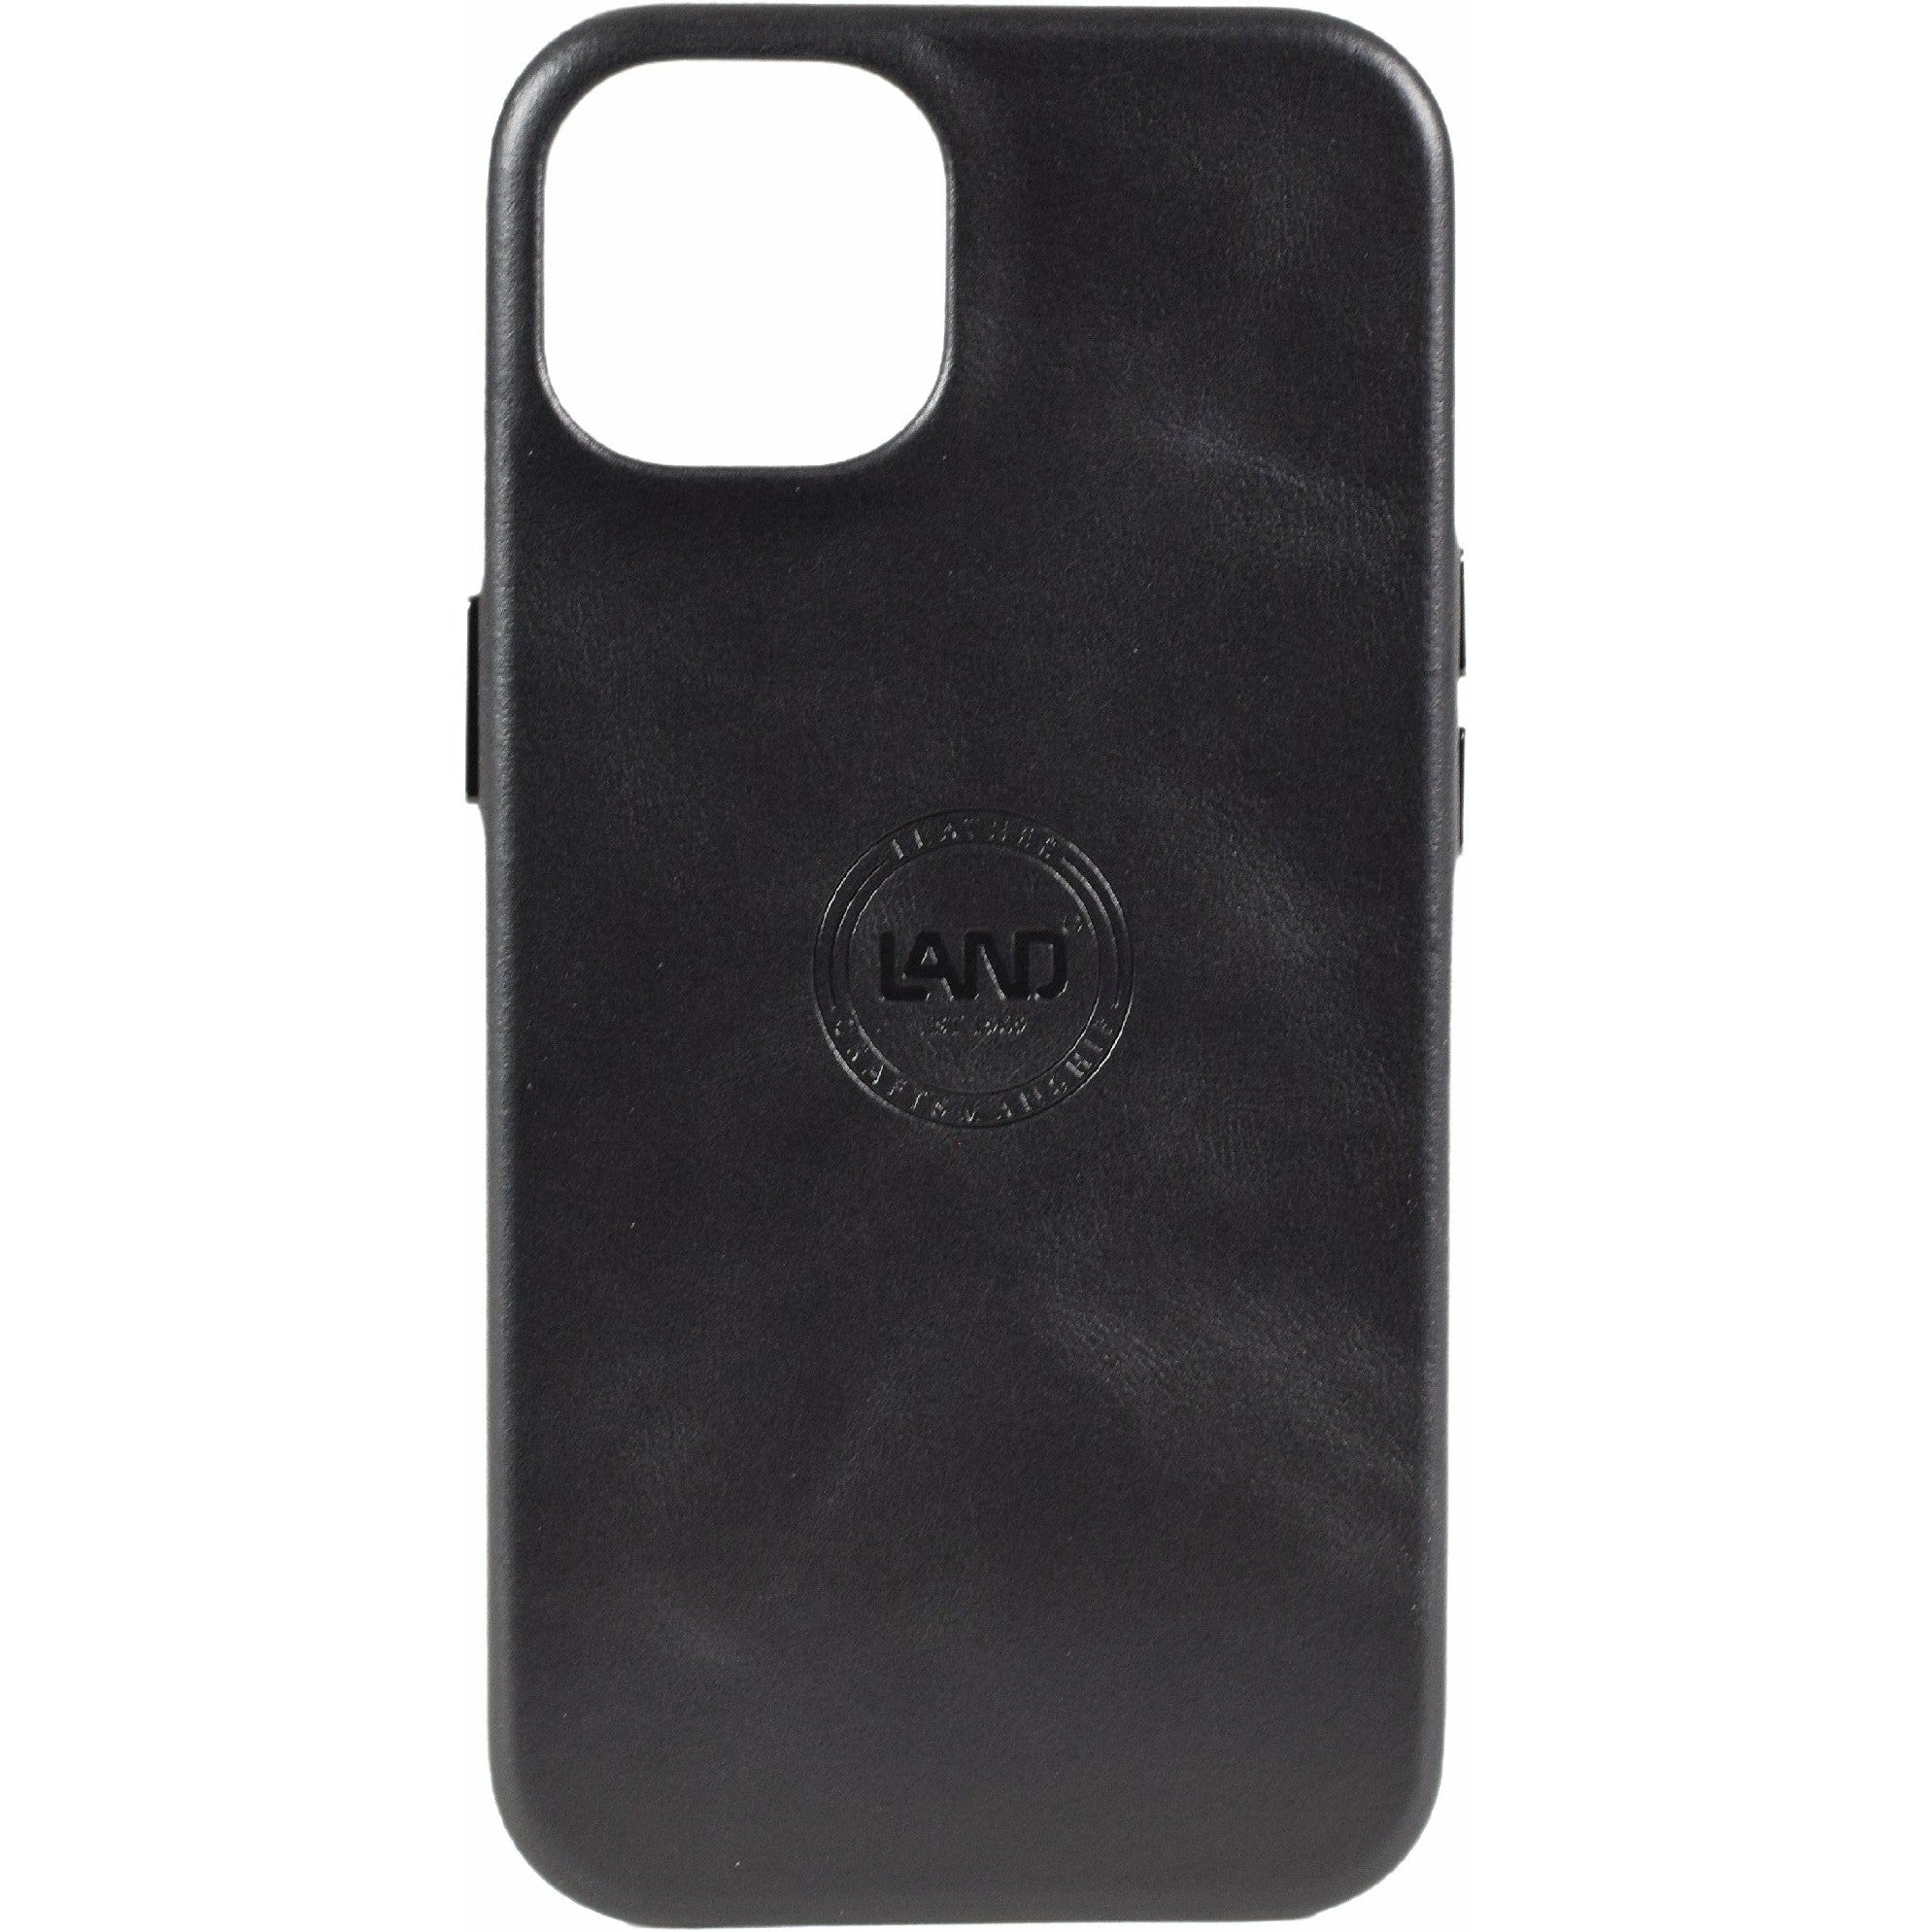 Leather iPhone 13 Case - LAND Leather Goods